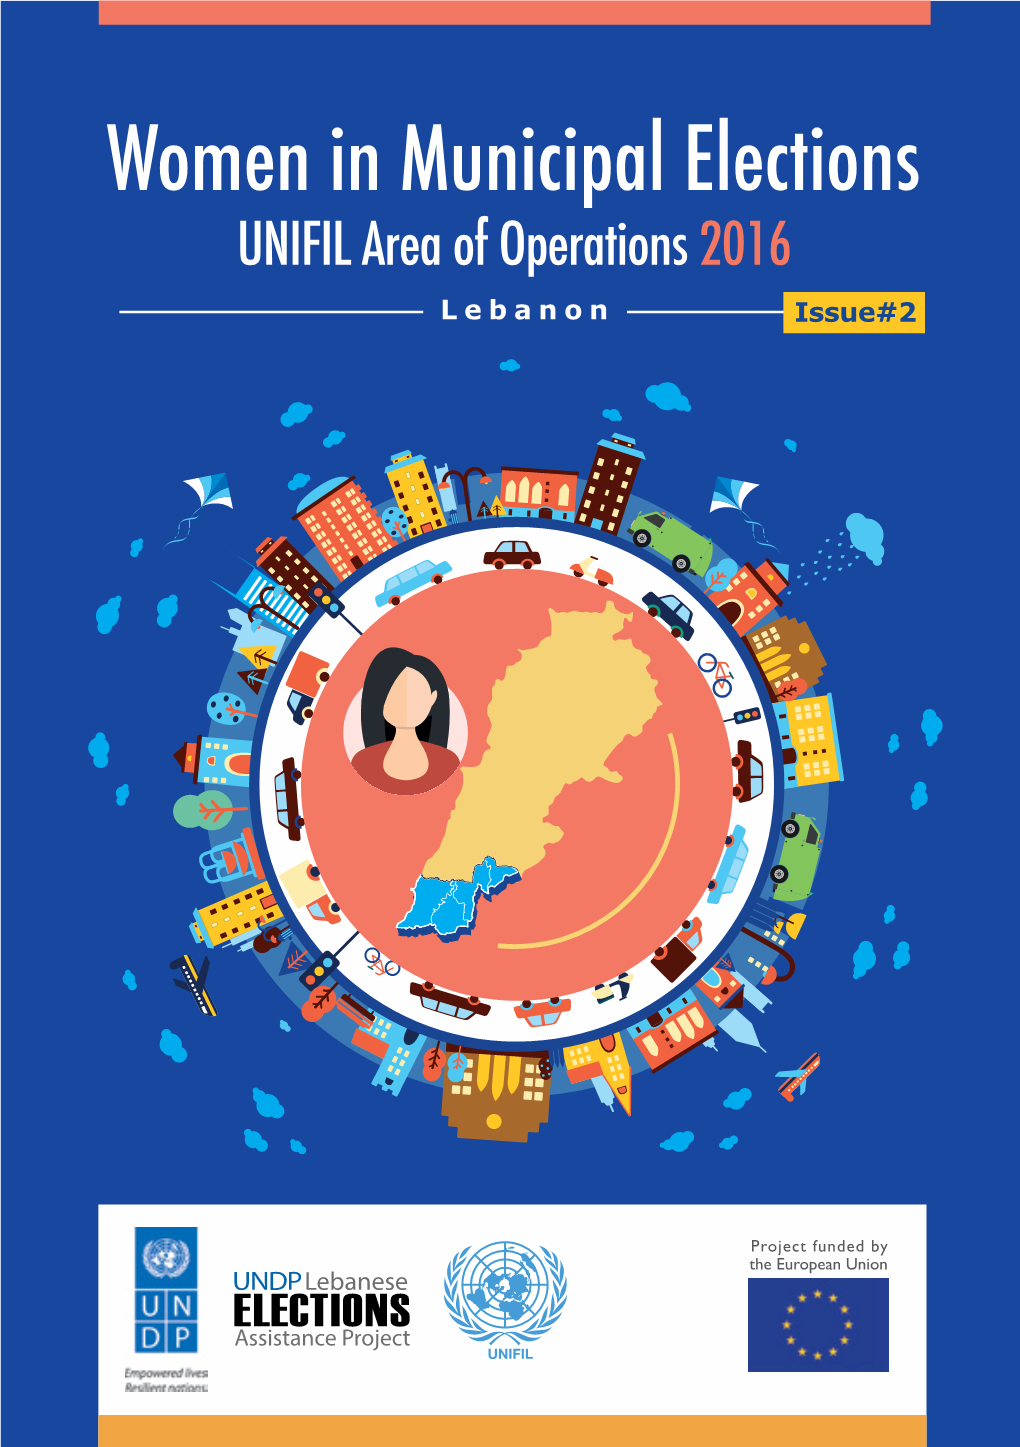 Women in Municipal Elections UNIFIL Area of Operations 2016 Lebanon Issue#2